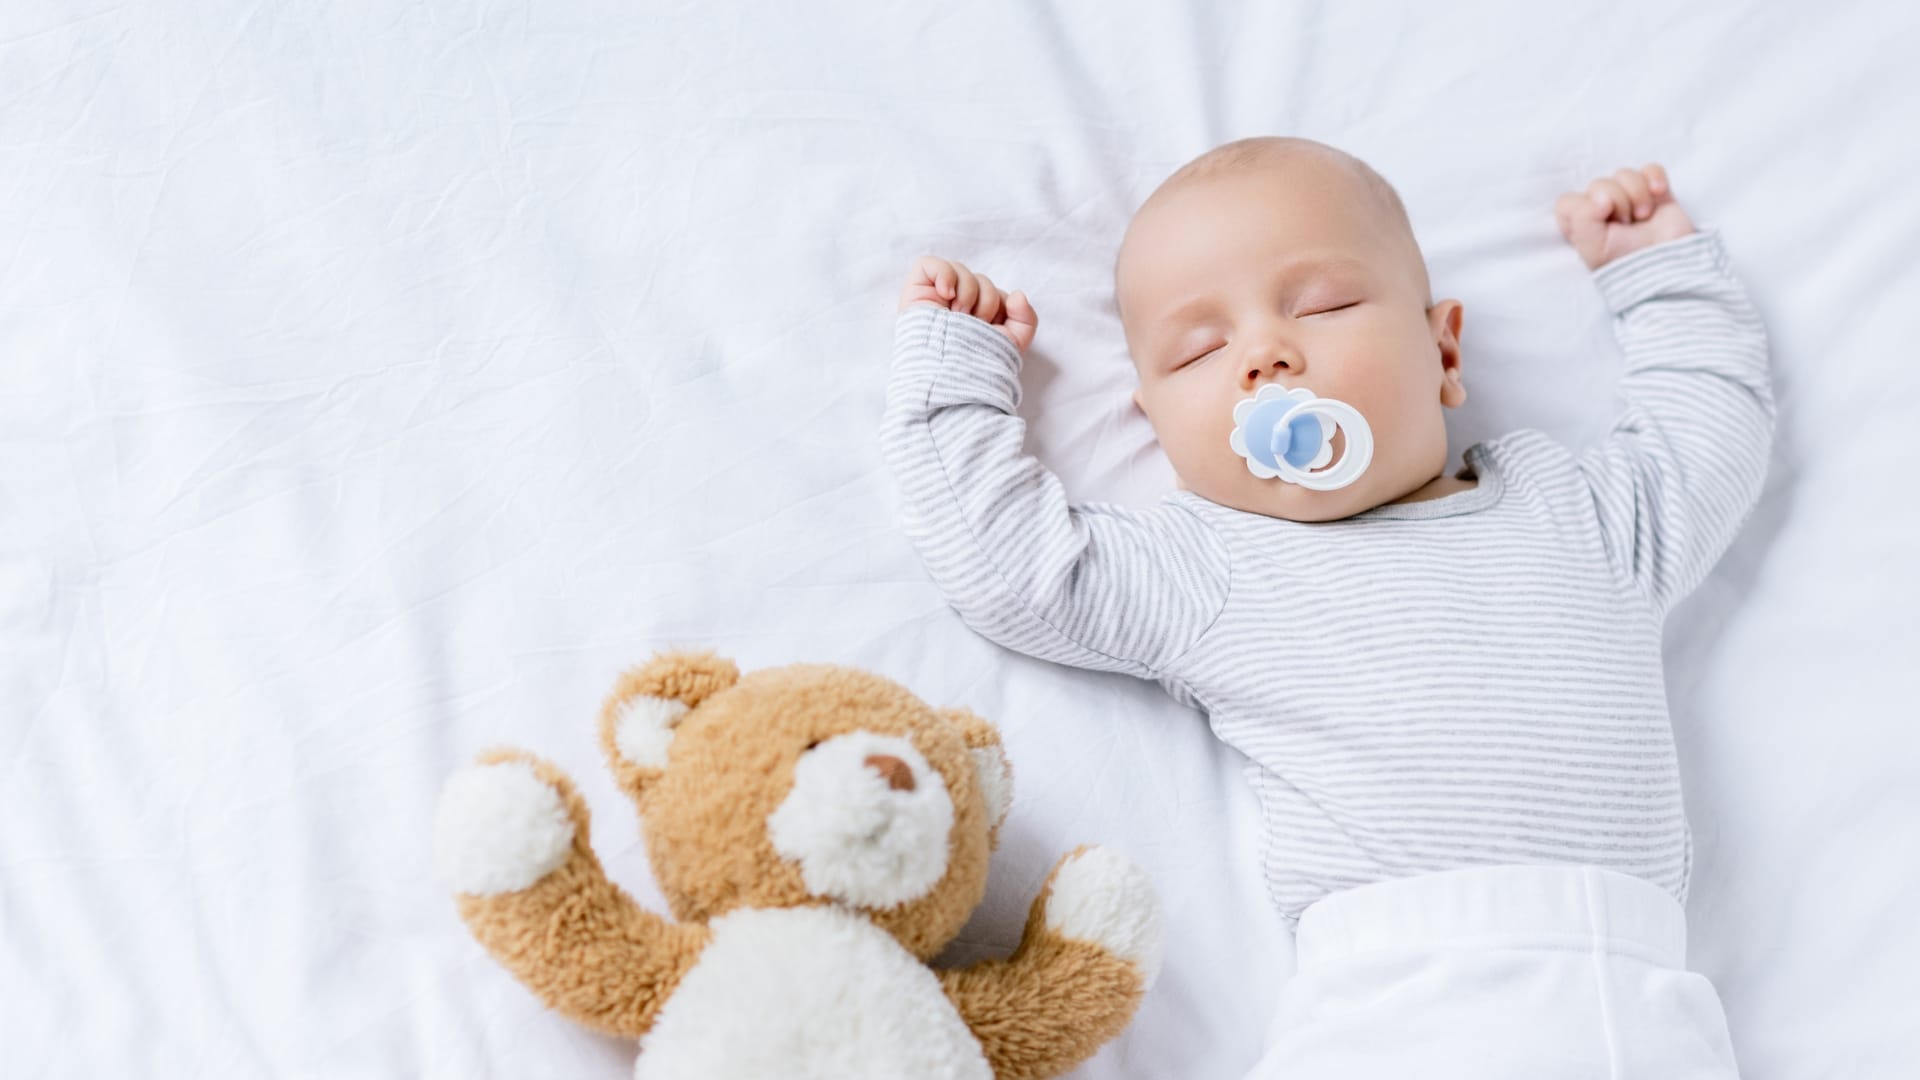 How to Self Soothe Baby: The Ultimate Guide To Peace & Calm